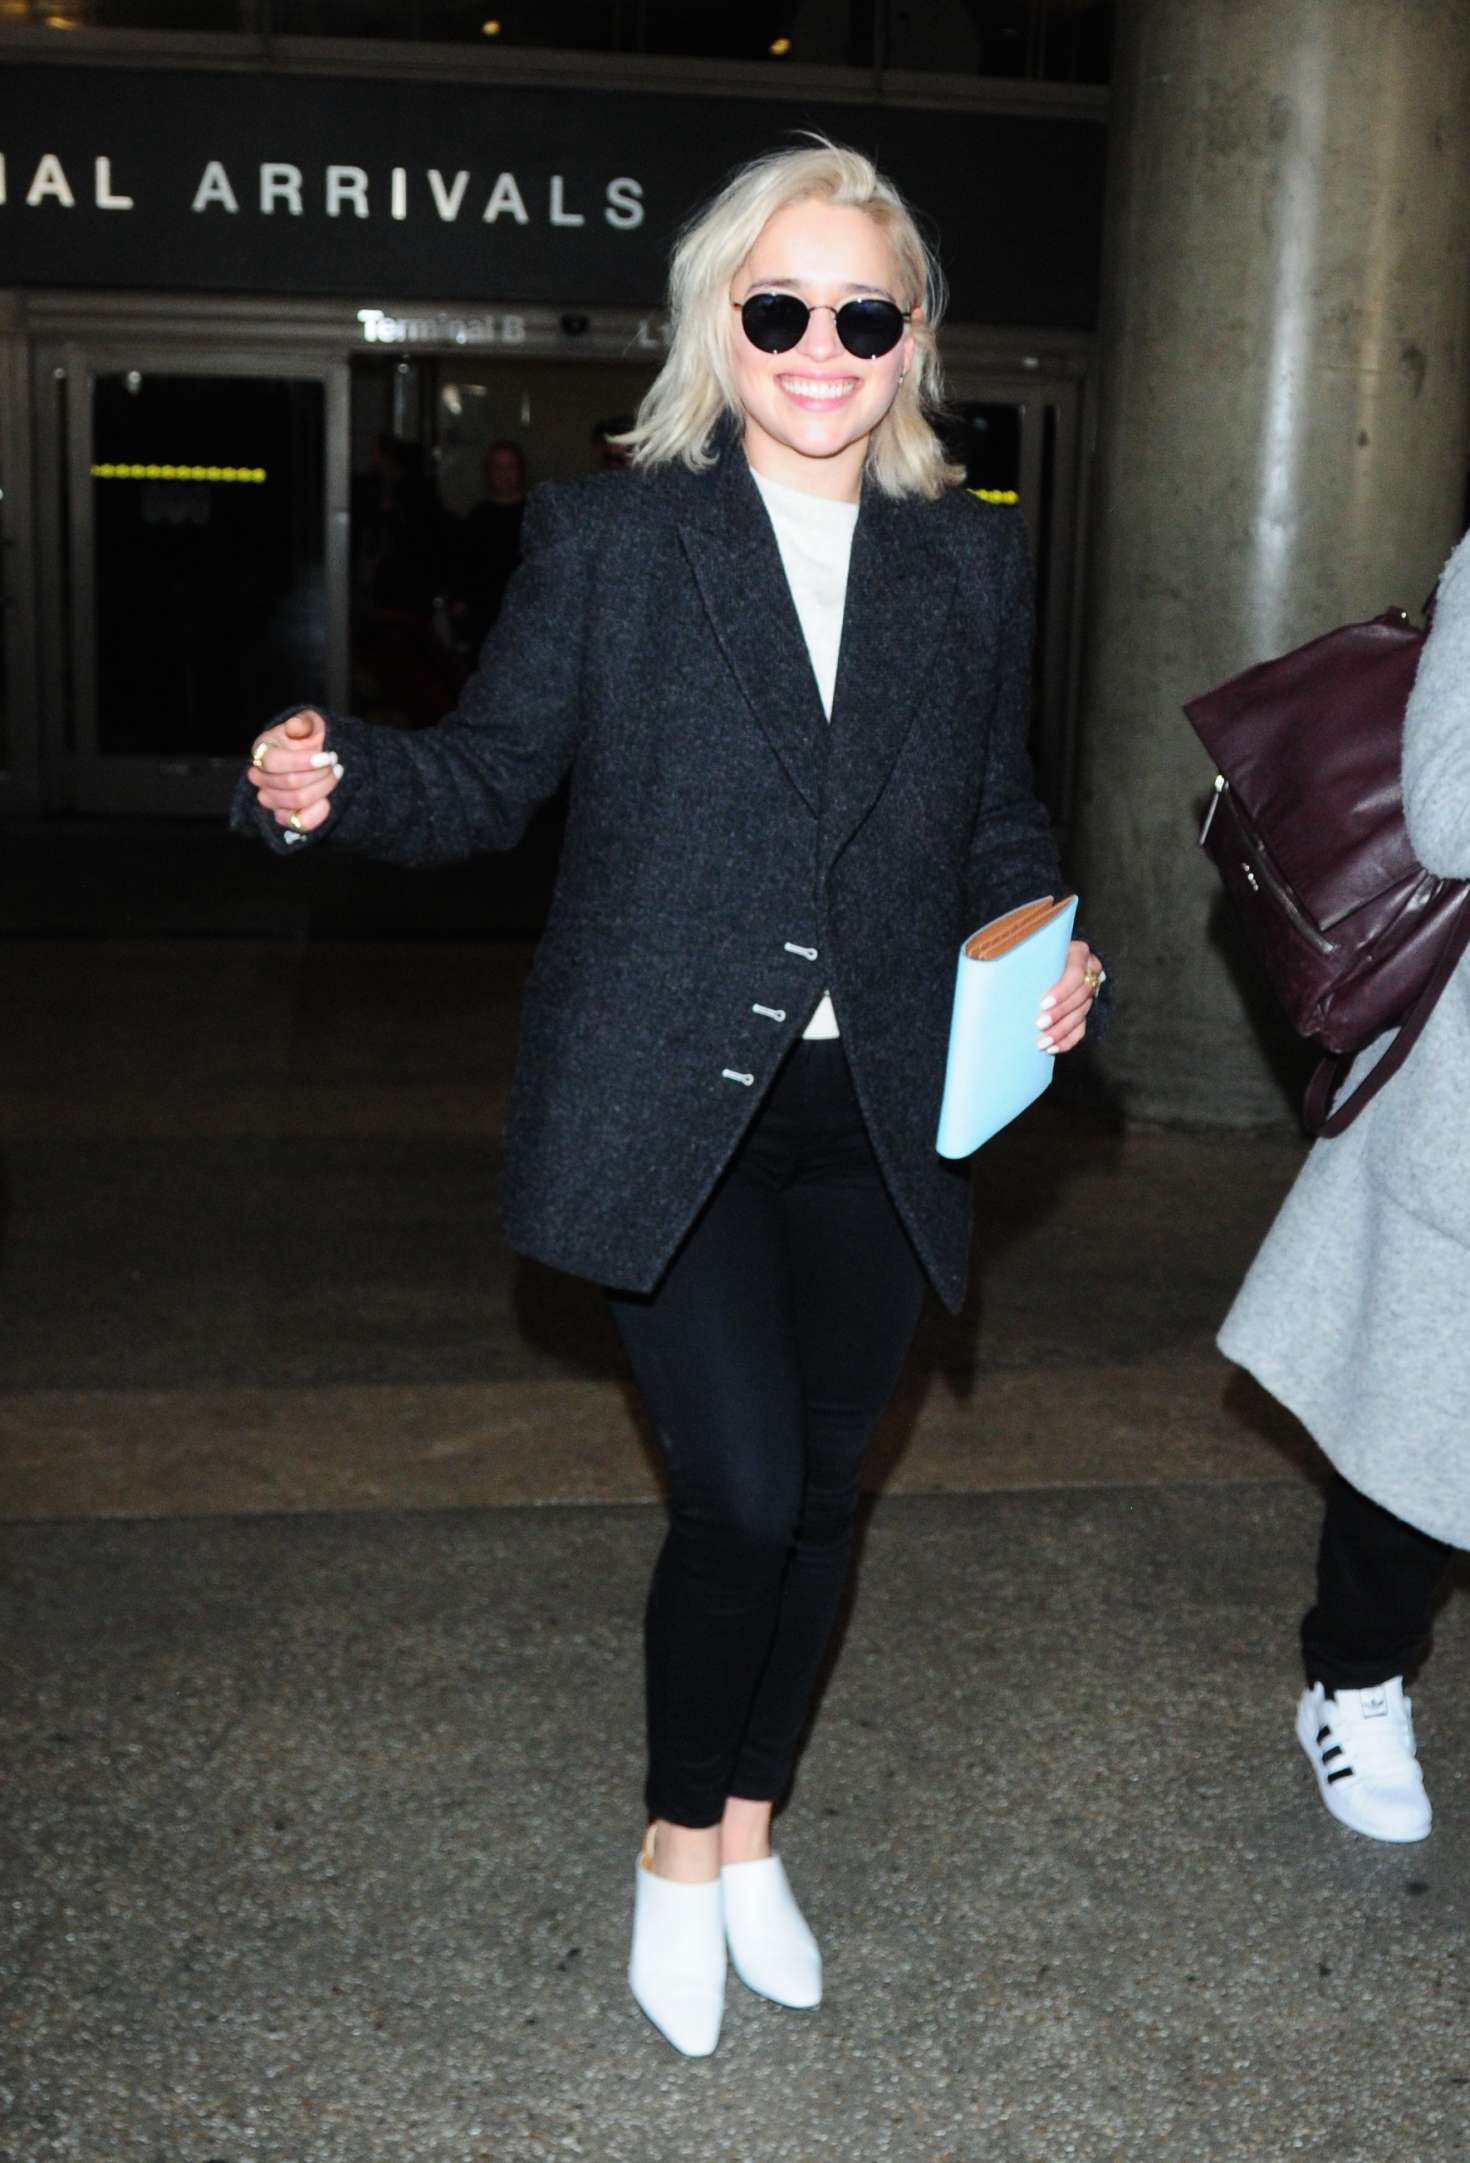 Emilia Clarke at LAX International Airport in Los Angeles